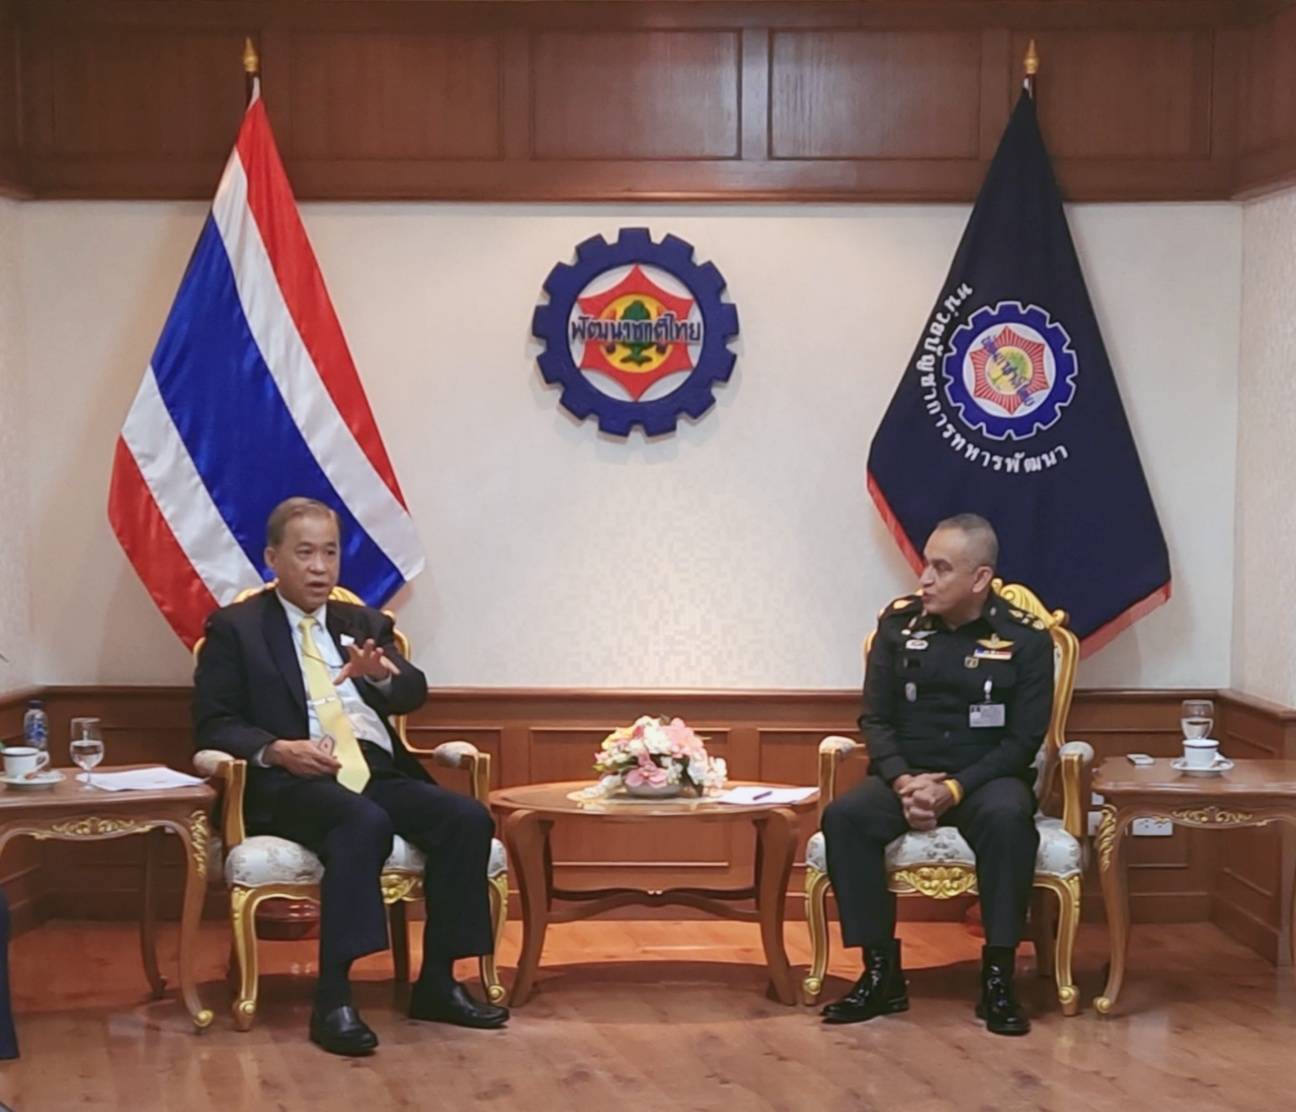 16 October 2020, at Armed Forces Development Command, Royal Thai Armed Forces Headquarters, Bangkok